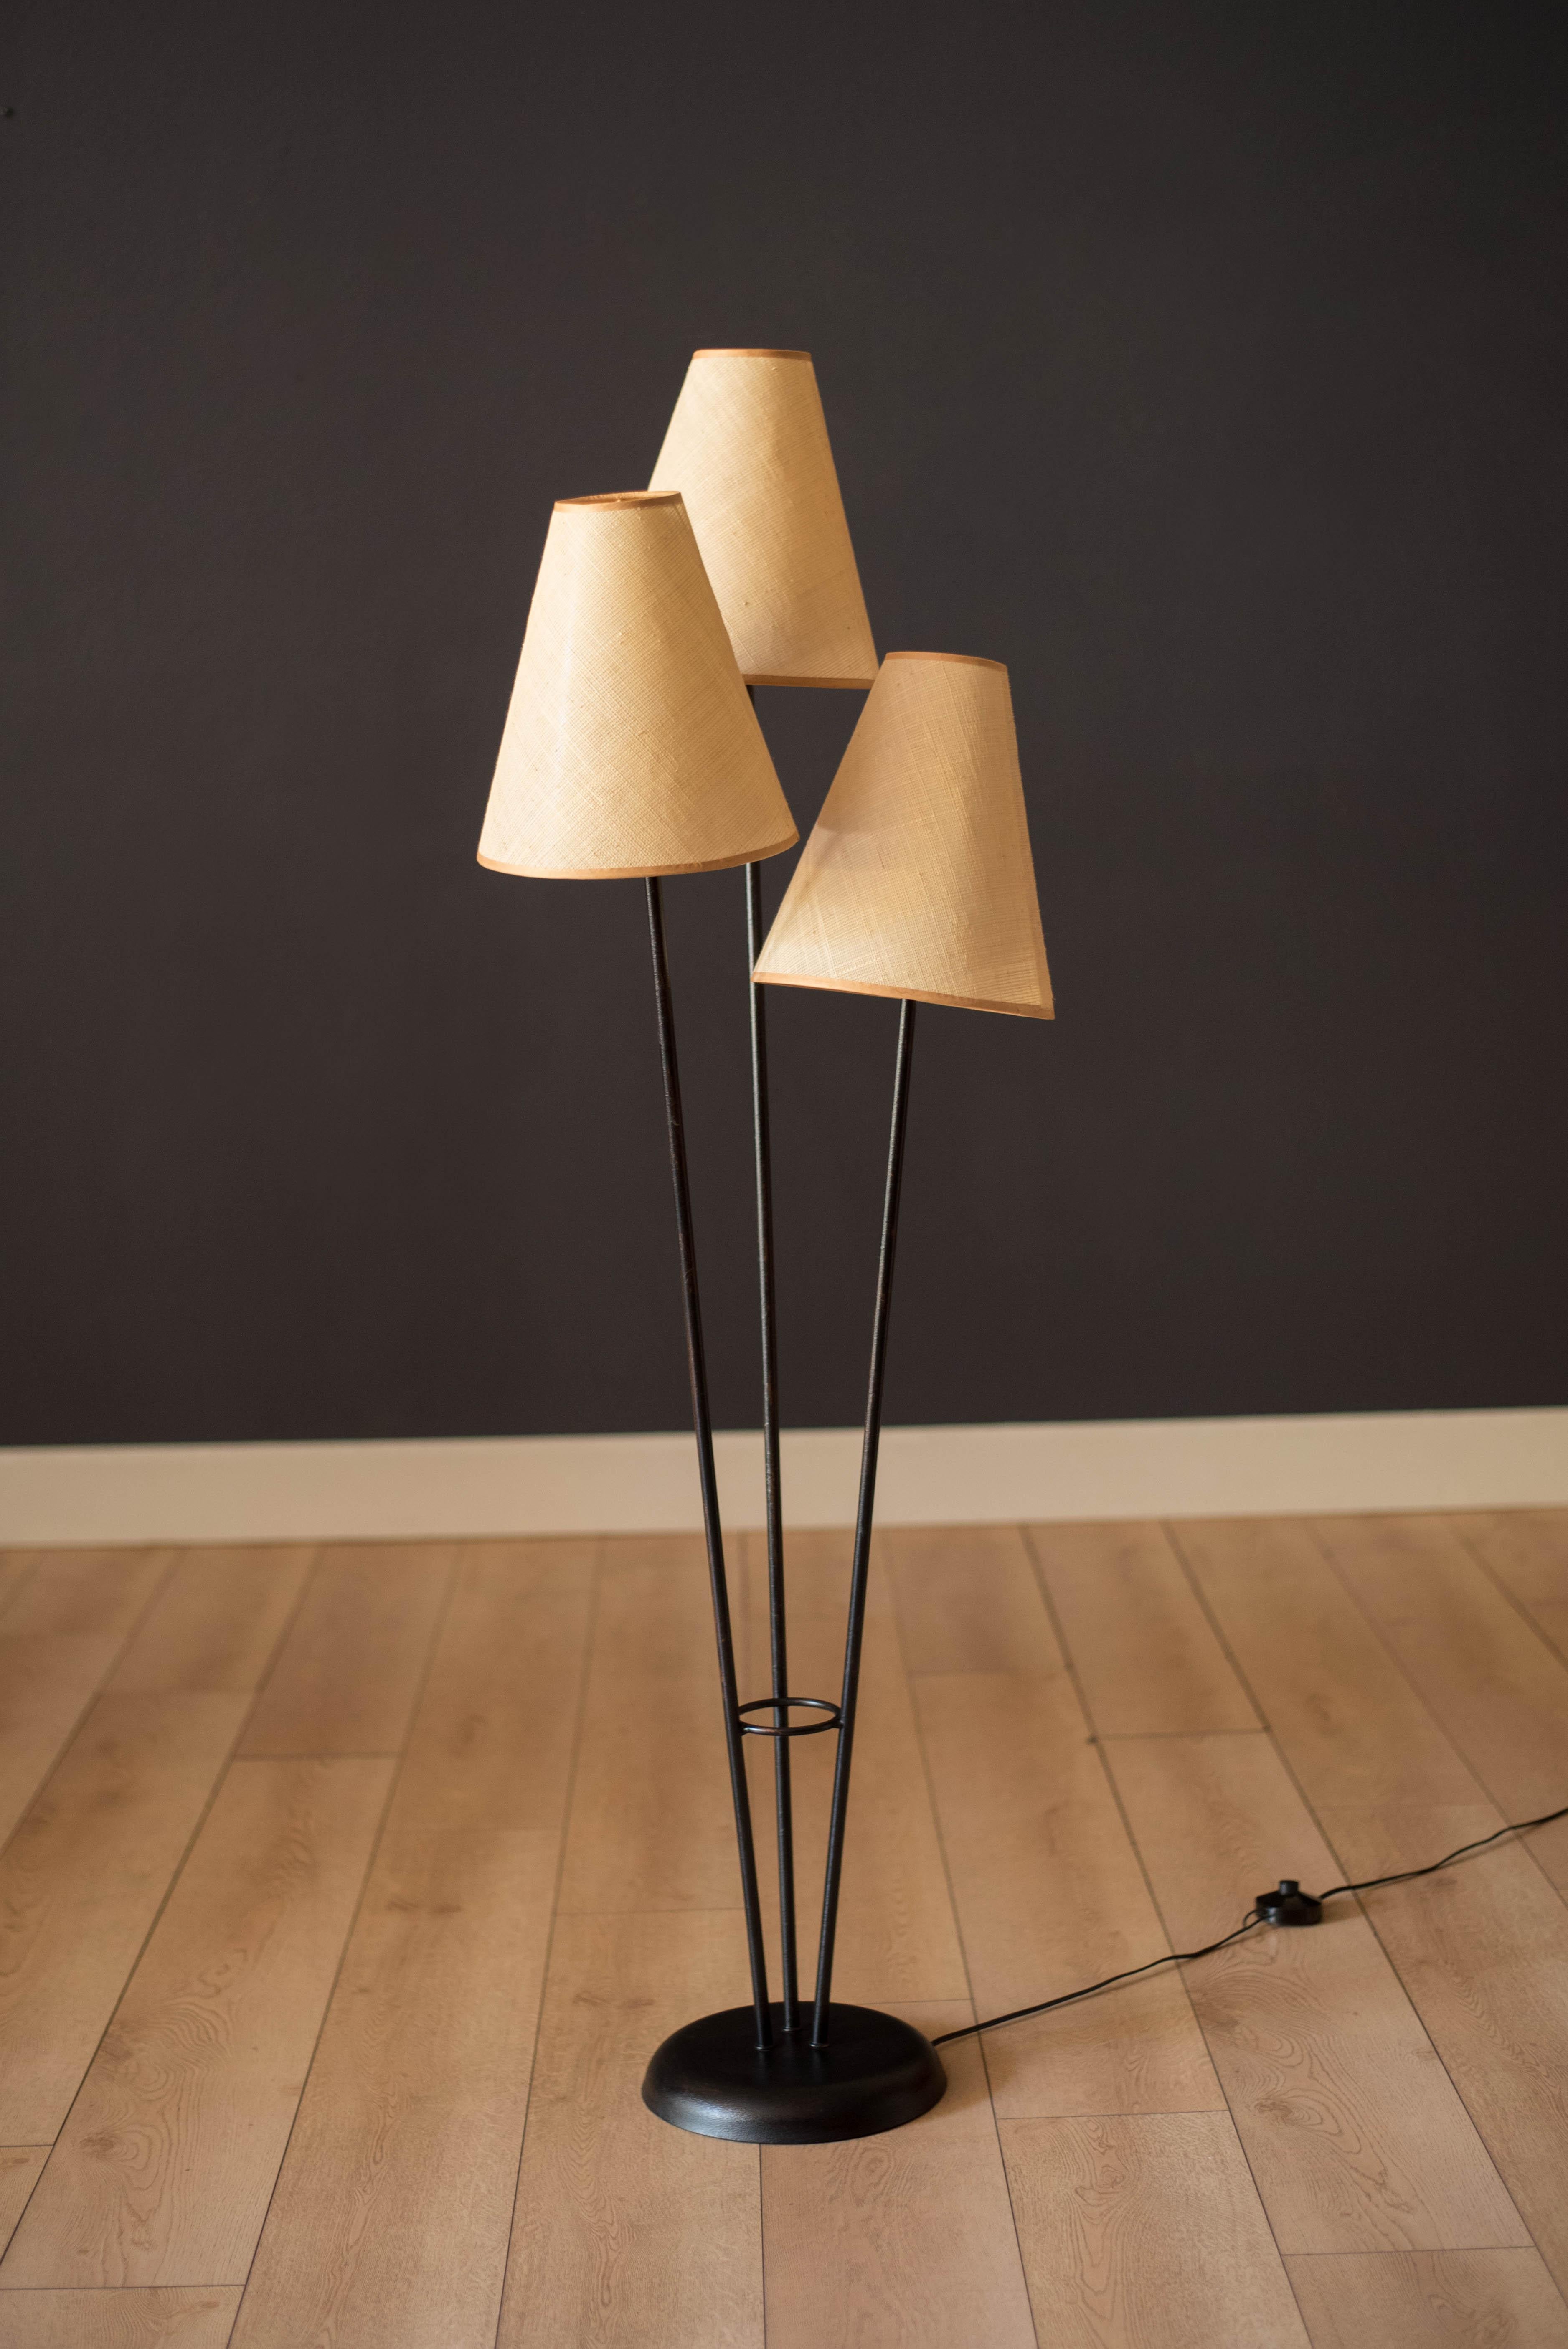 Classic vintage triple light floor lamp circa 1960's. This unique piece features three tapered natural woven fiber shades that emits a soft warm glow. Supporting base is made out of metal construction finished in a textured black enamel.




Offered